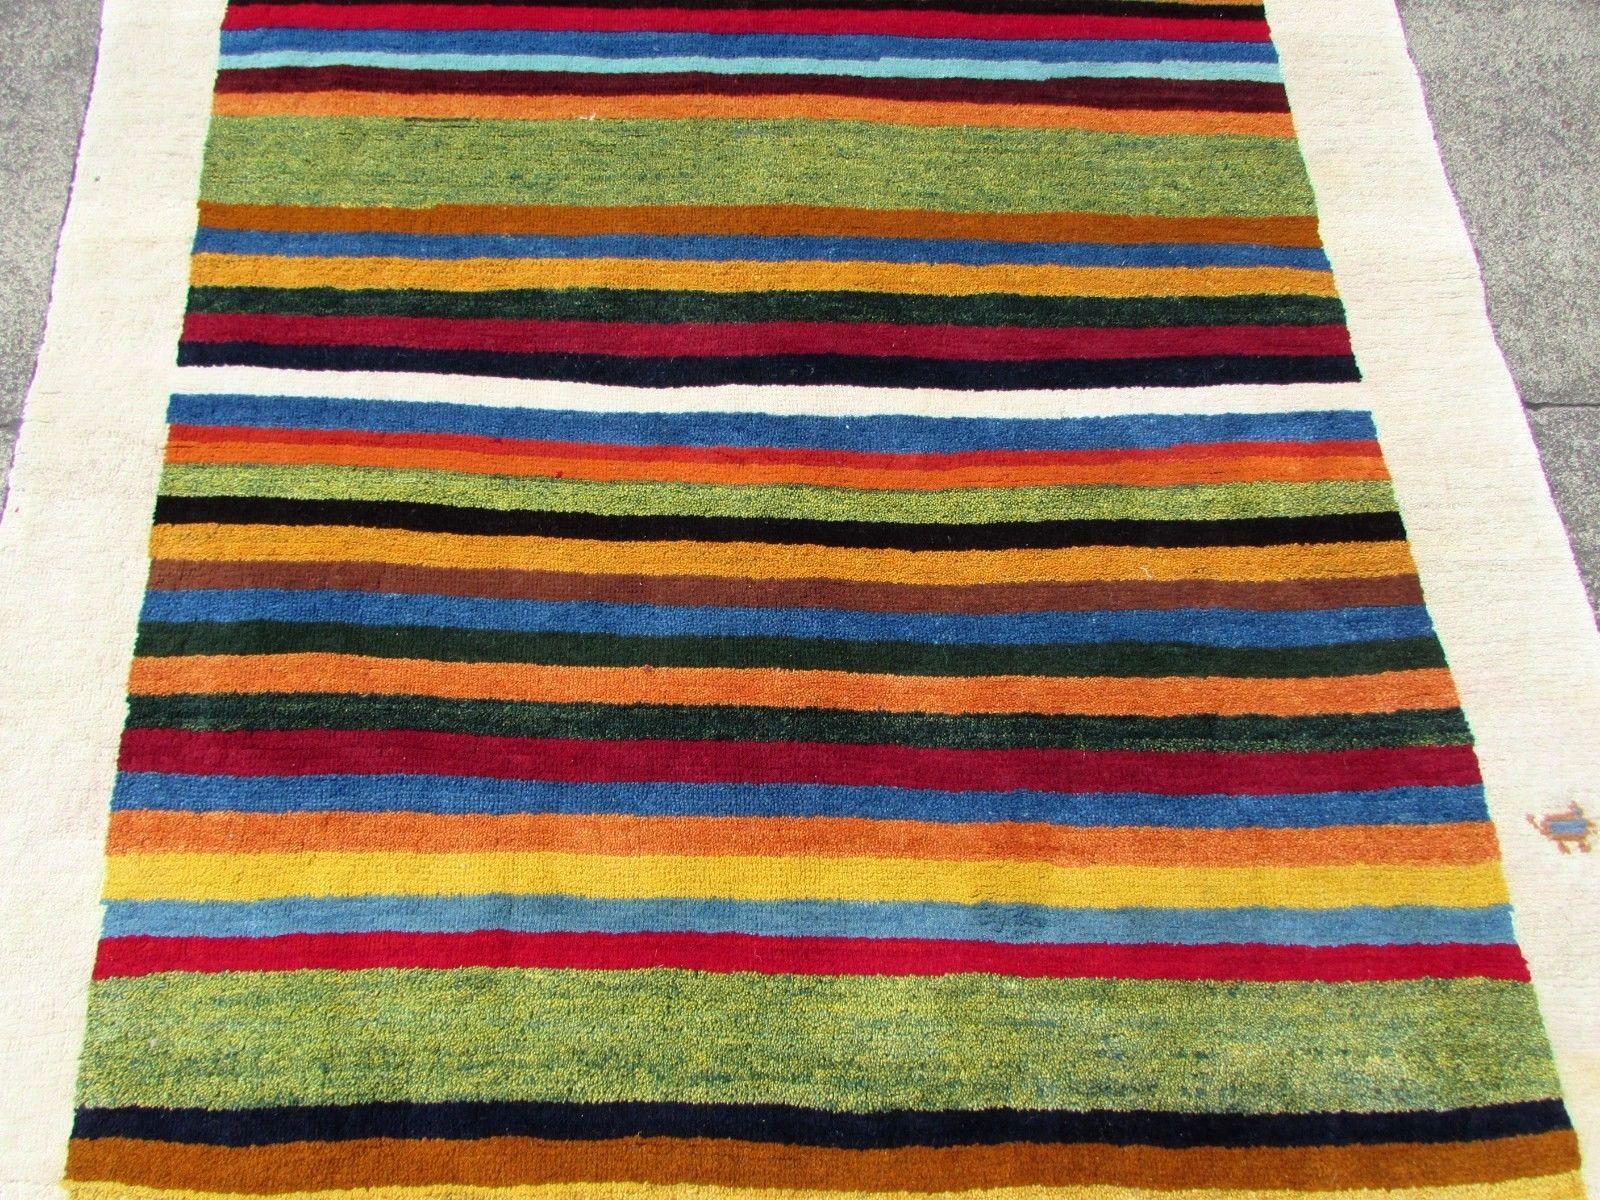 Handmade vintage Gabbeh rug in geometric design. The rug is from the end of 20th century in original good condition.

-Condition: Original good,

-circa 1980s,

-Size: 4.7' x 9.7' (138cm x 287cm),

-Material: wool,

-Country of origin: